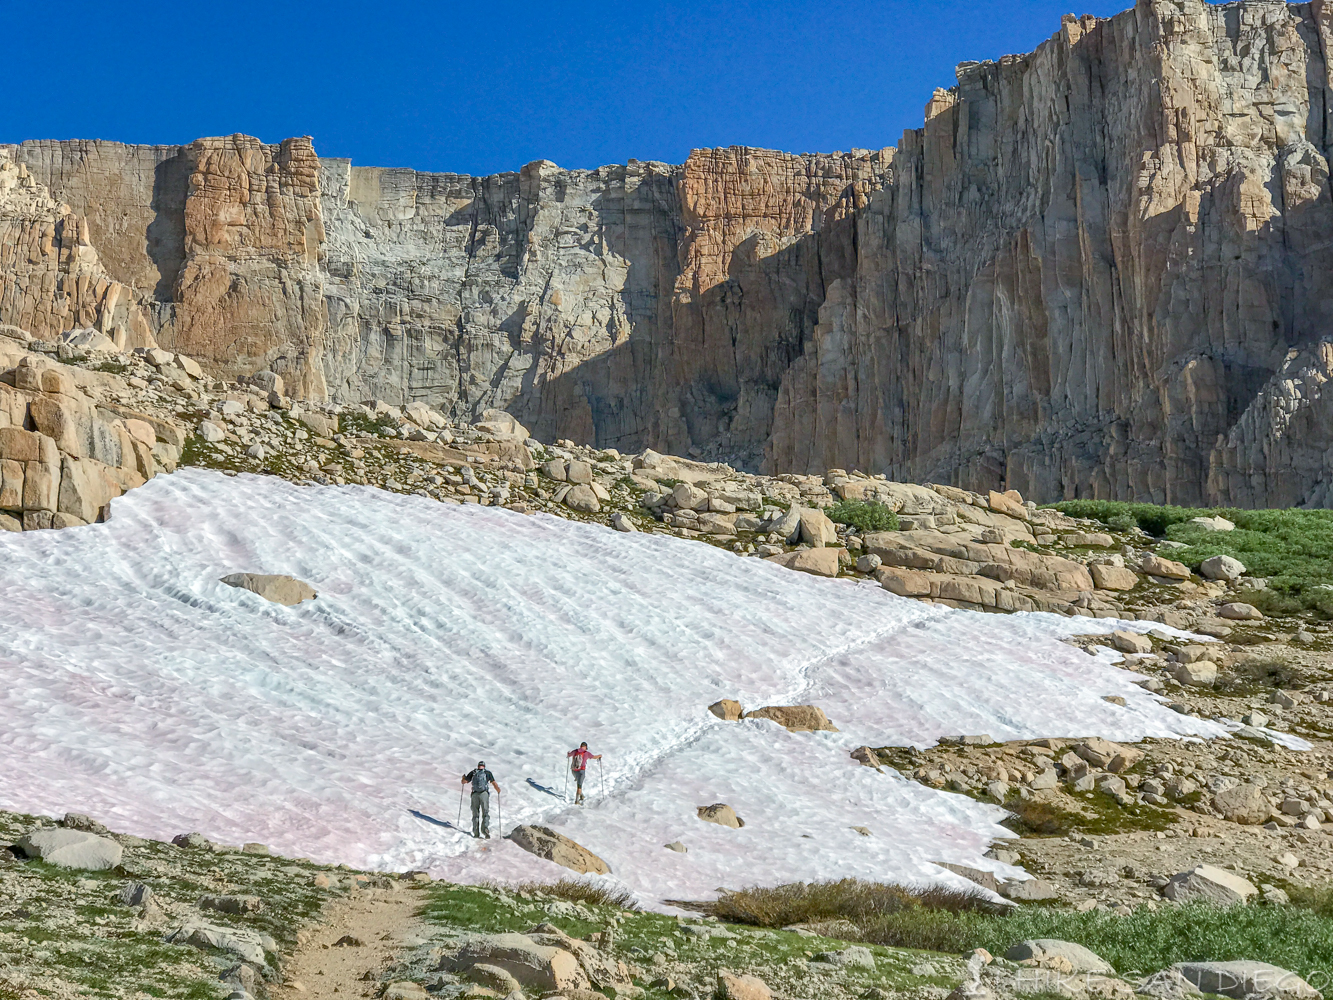 Heading up to High Lake on the New Army Pass trail through pink "Watermelon Snow".